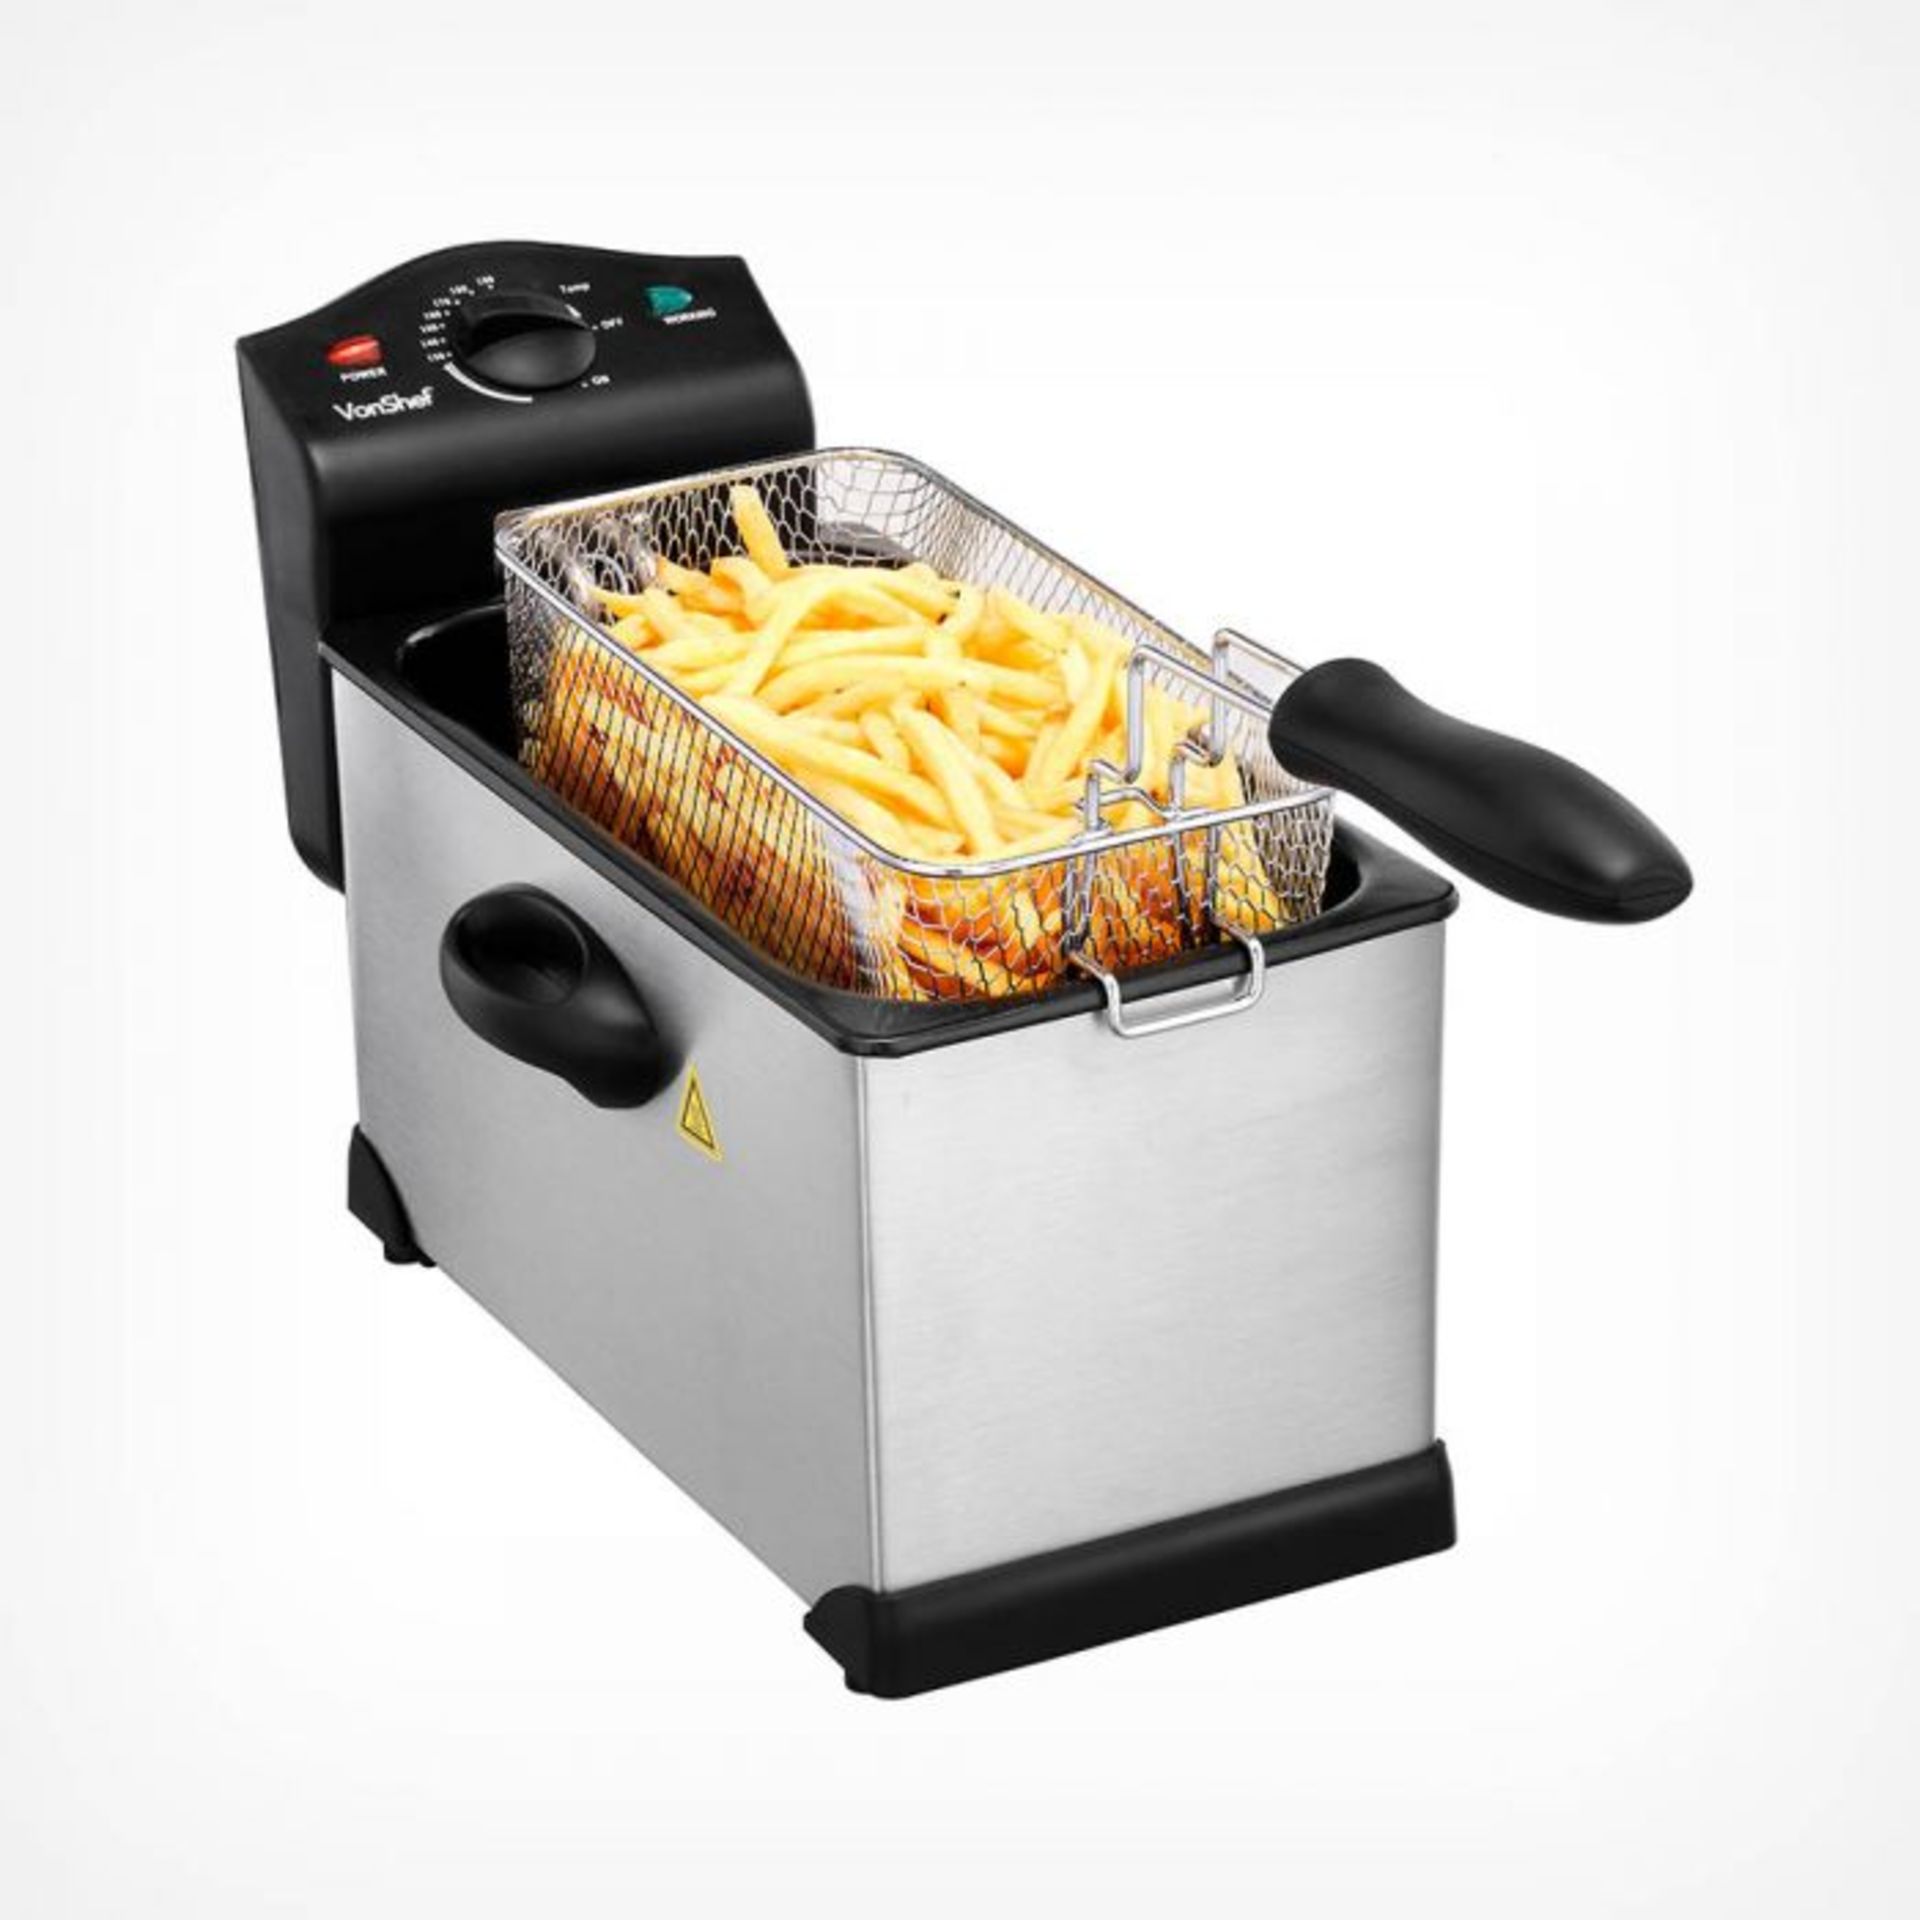 (V182) 3L Deep Fat Fryer Large 3L capacity Deep Fat Fryer from VonShef – perfect for frying ... - Image 2 of 4